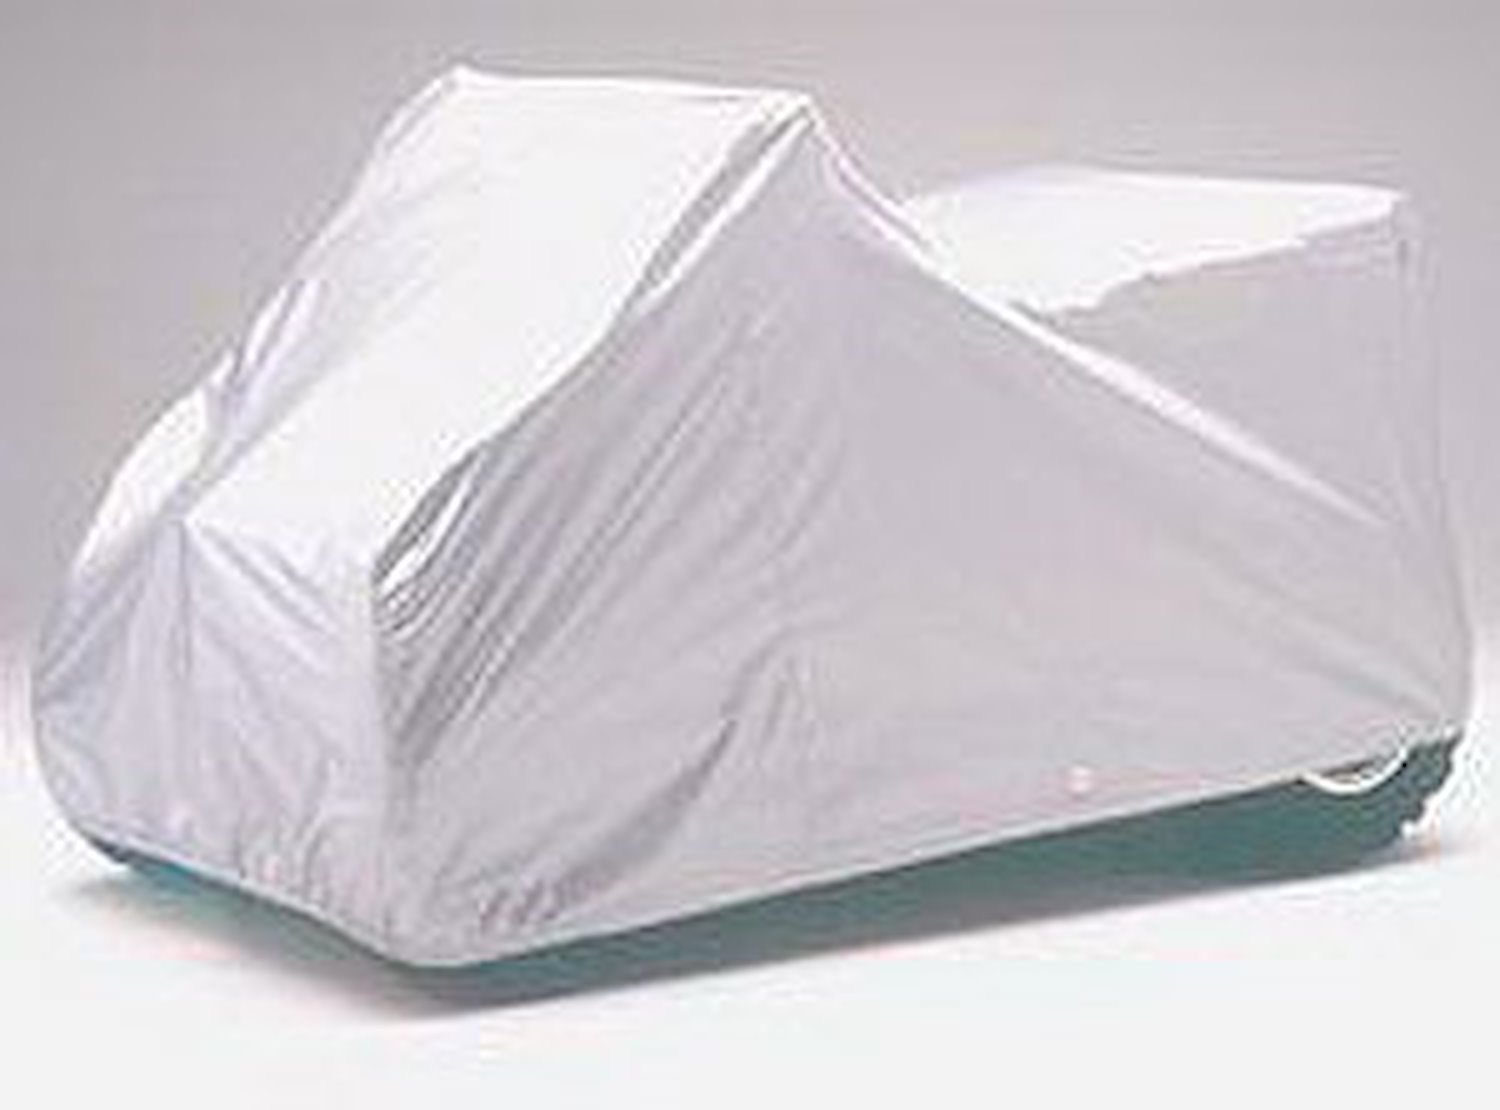 Ready-Fit ATV Cover Silver Urethane Retail Box Large w/Racks 72 in. And Up Overall Length Incl. Tie Down Grommets